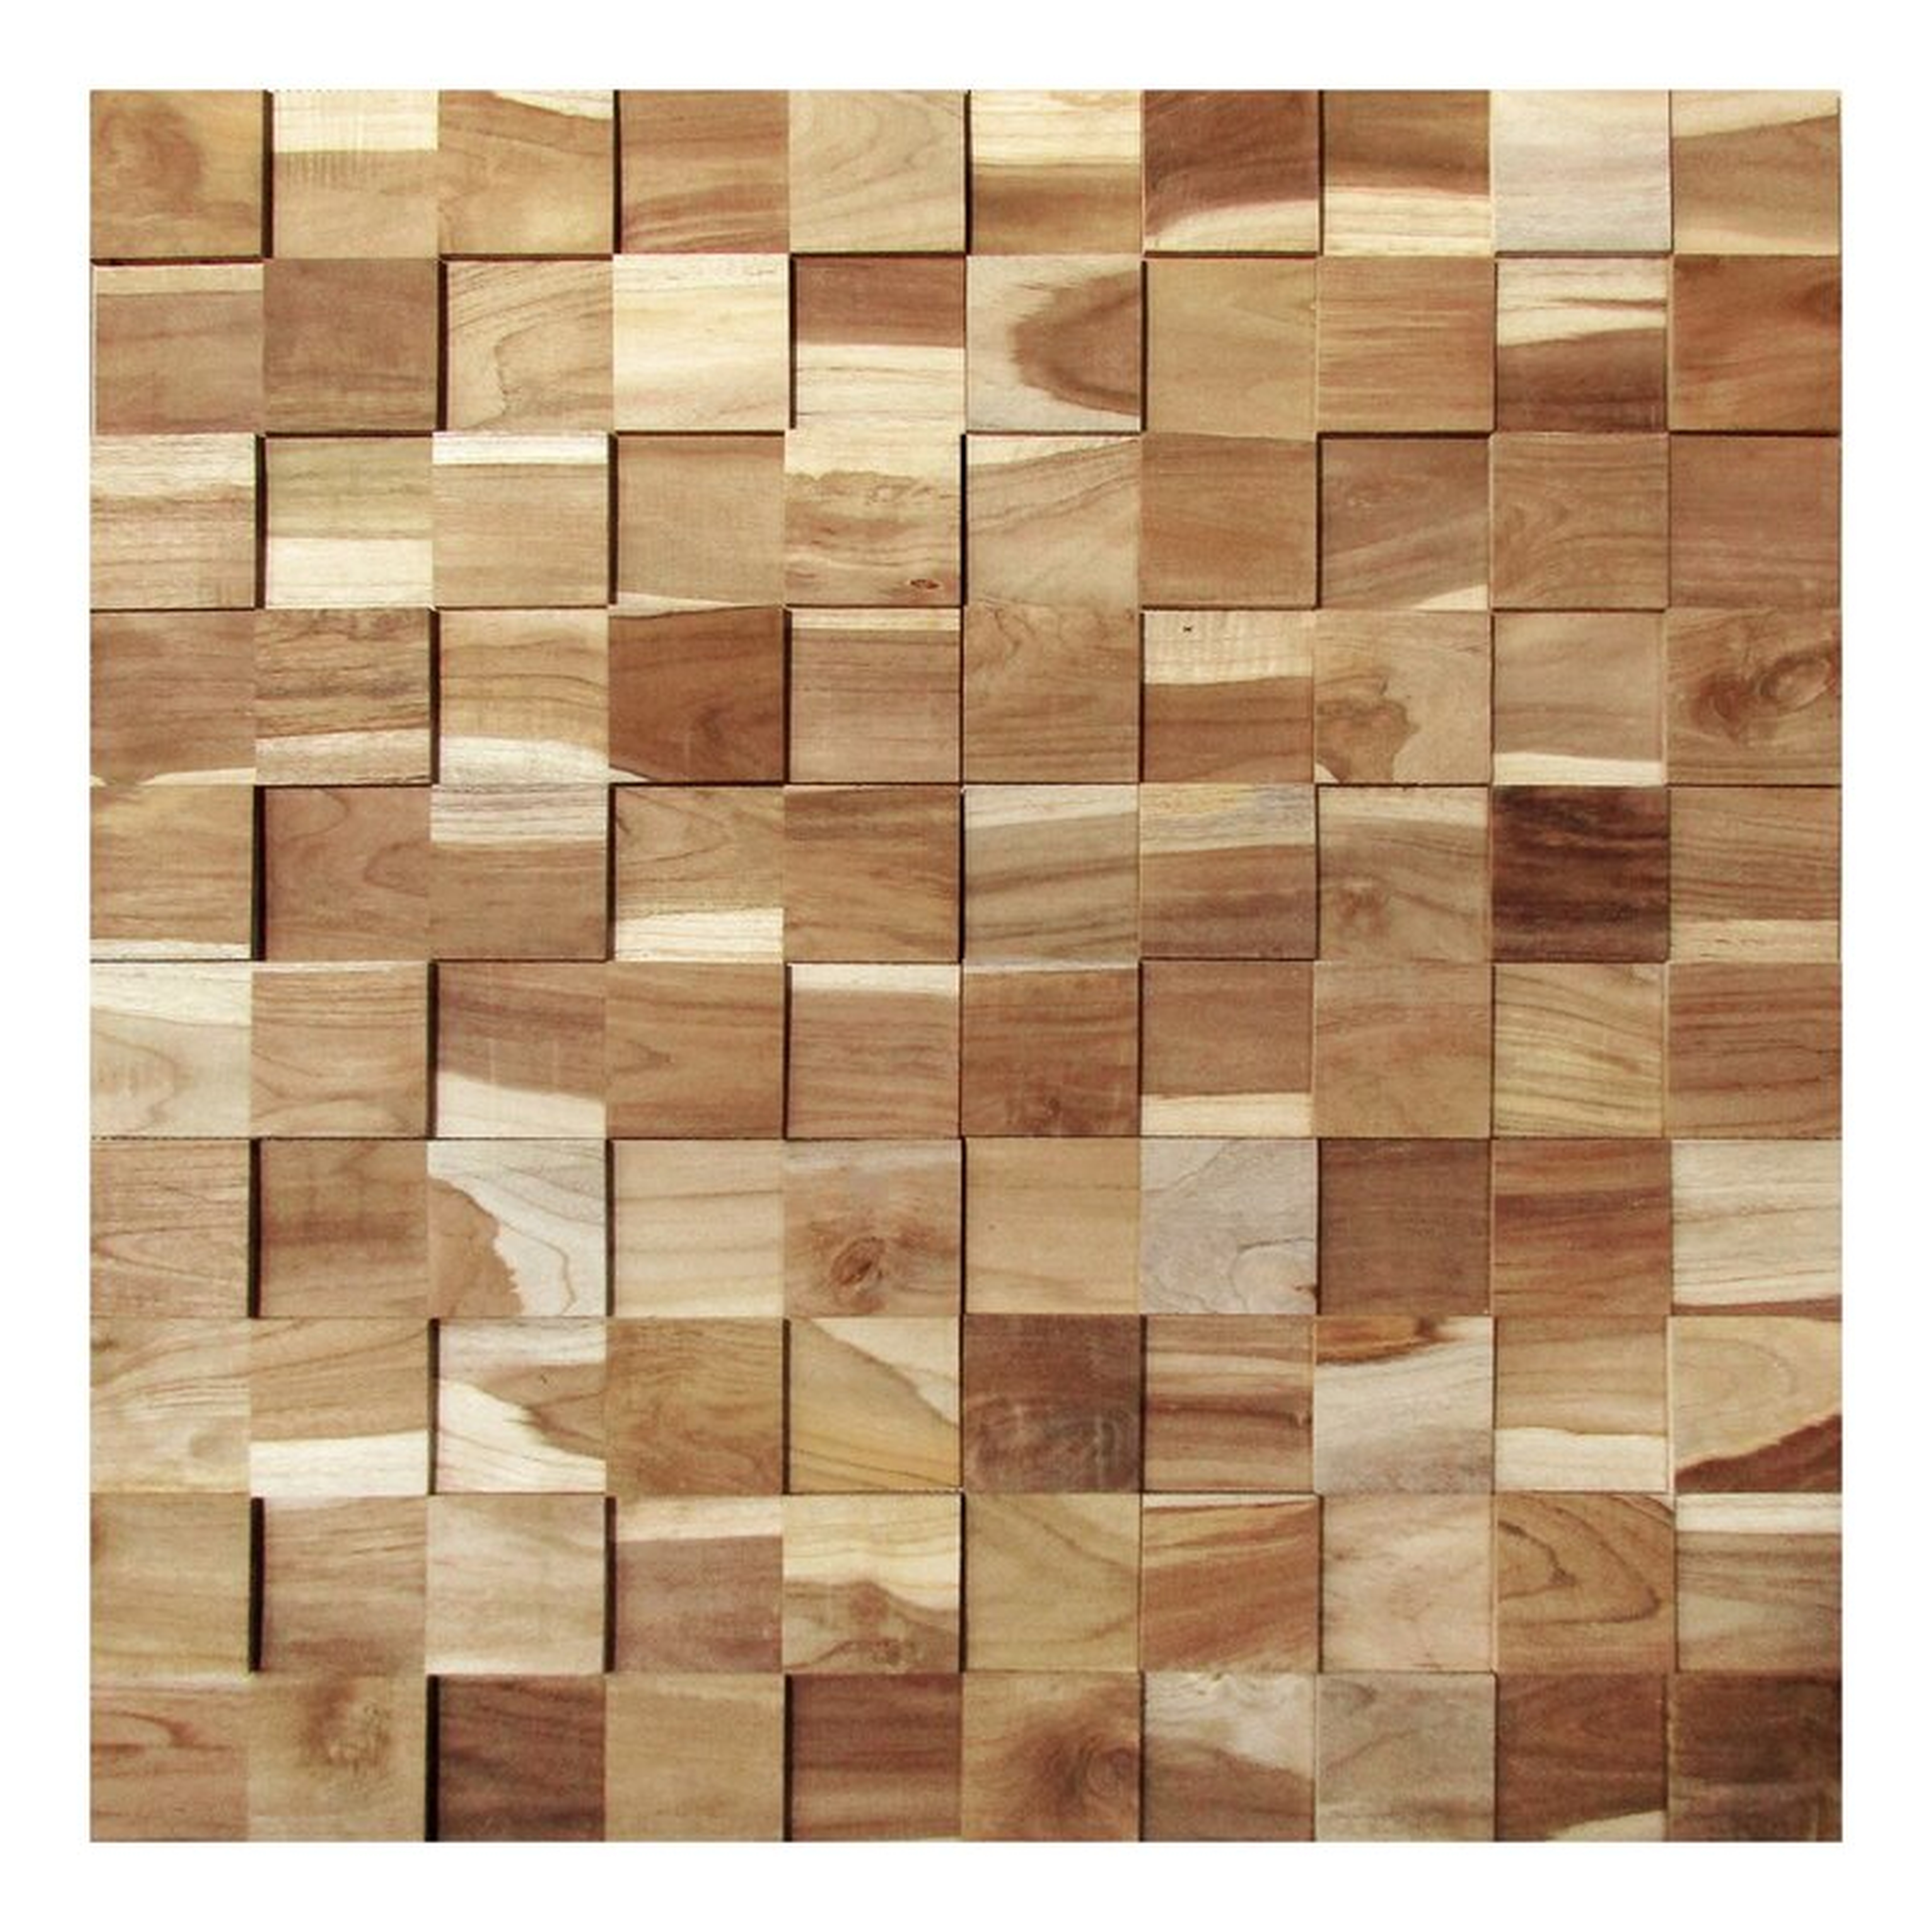 7.75" x 20" Reclaimed Solid Wood Wall Paneling in Natural - Perigold